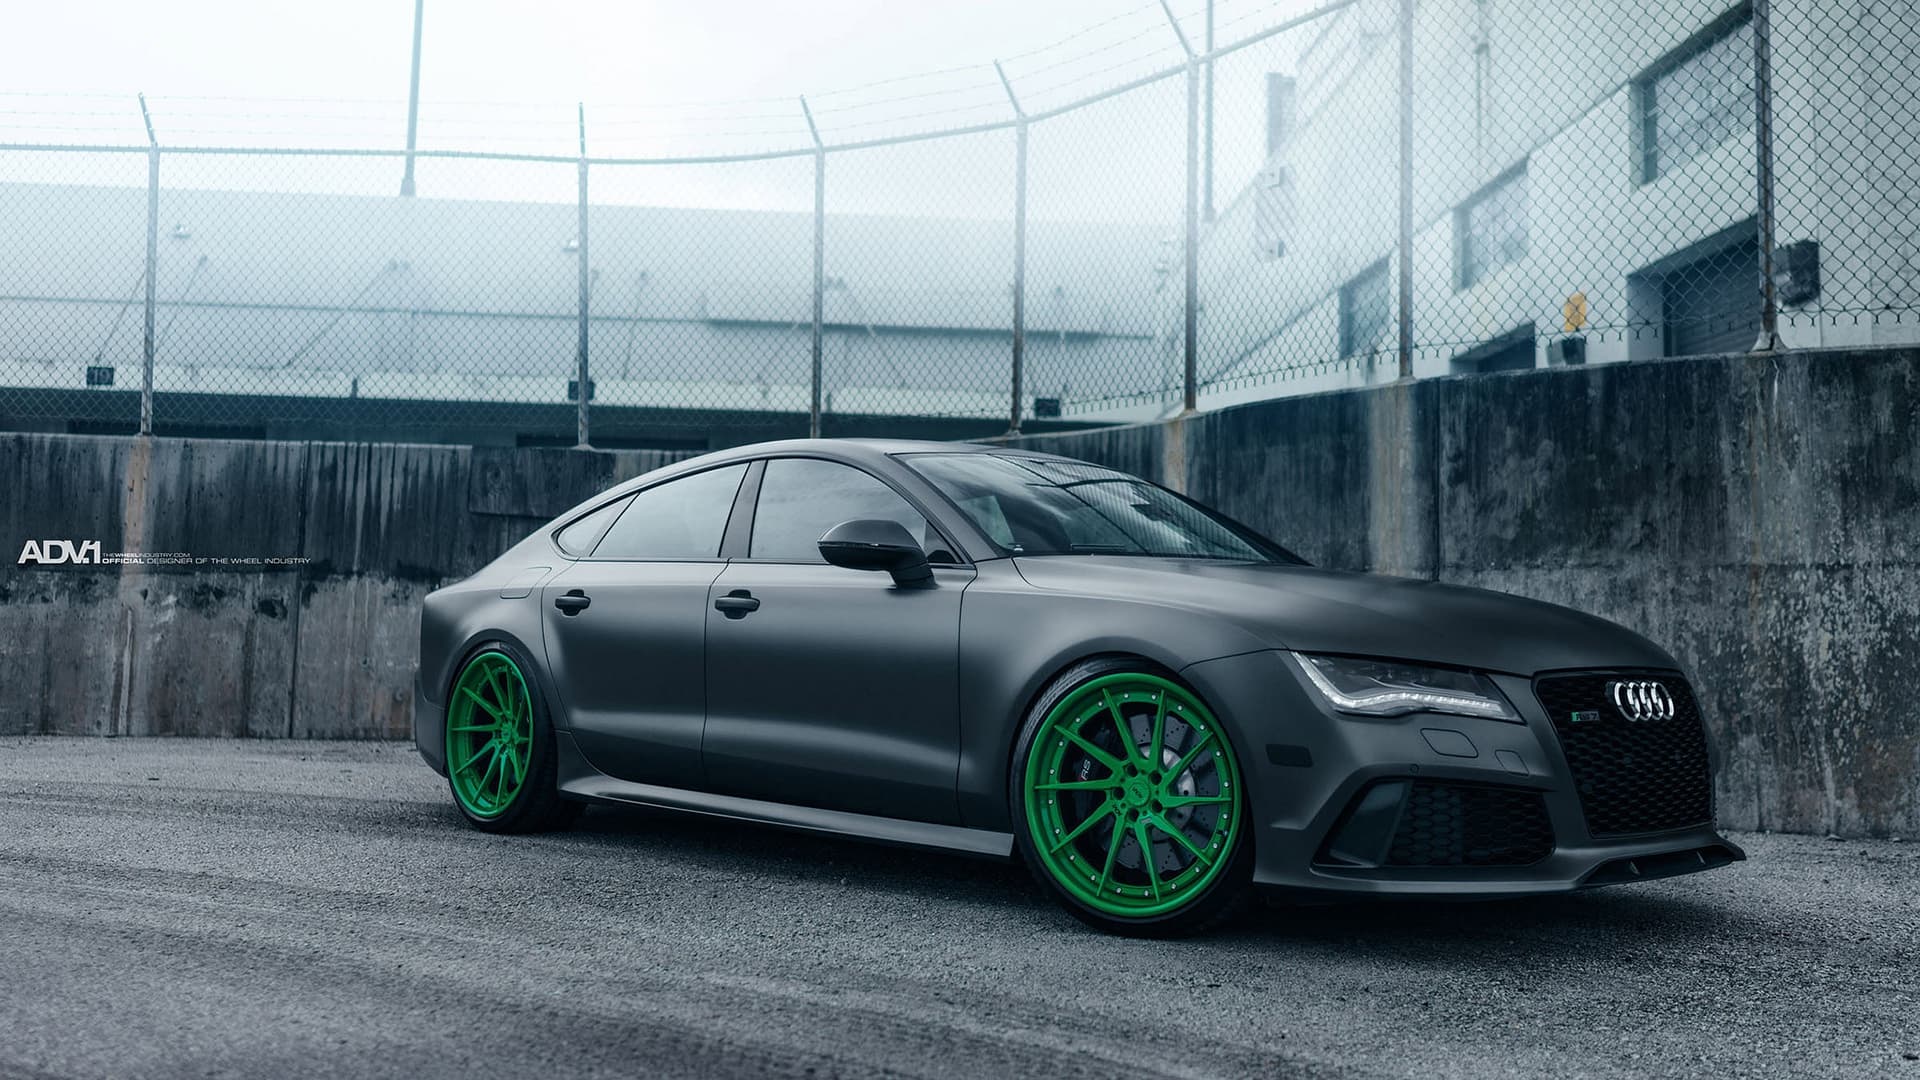 Audi RS7 wallpaper HD HIgh Quality Resolution Download